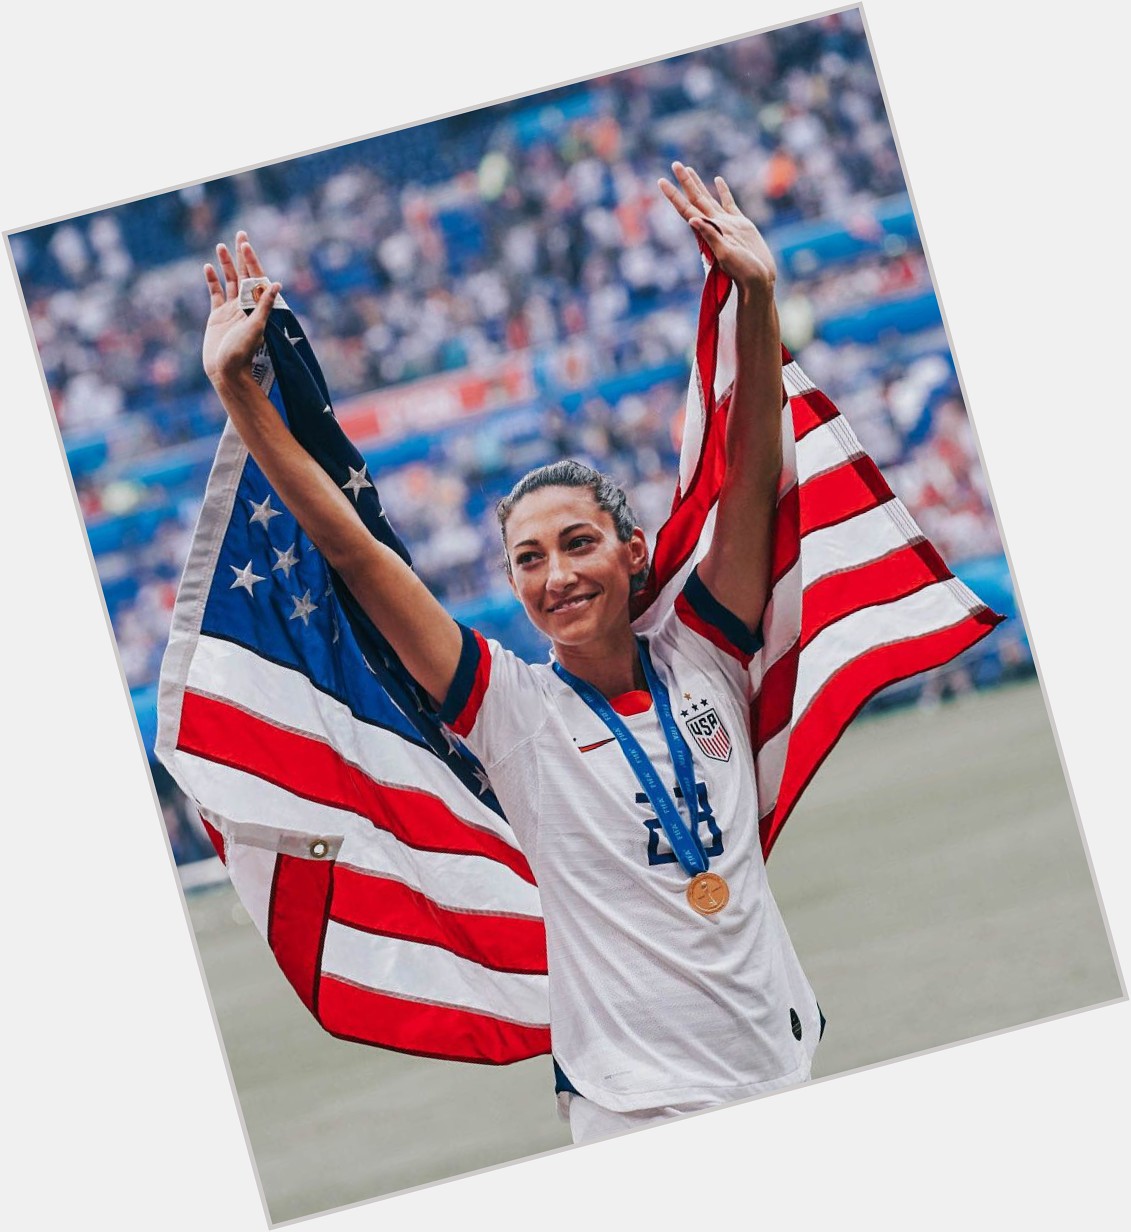 Happy birthday two time world cup champ Christen Press. 31 never looked better. 